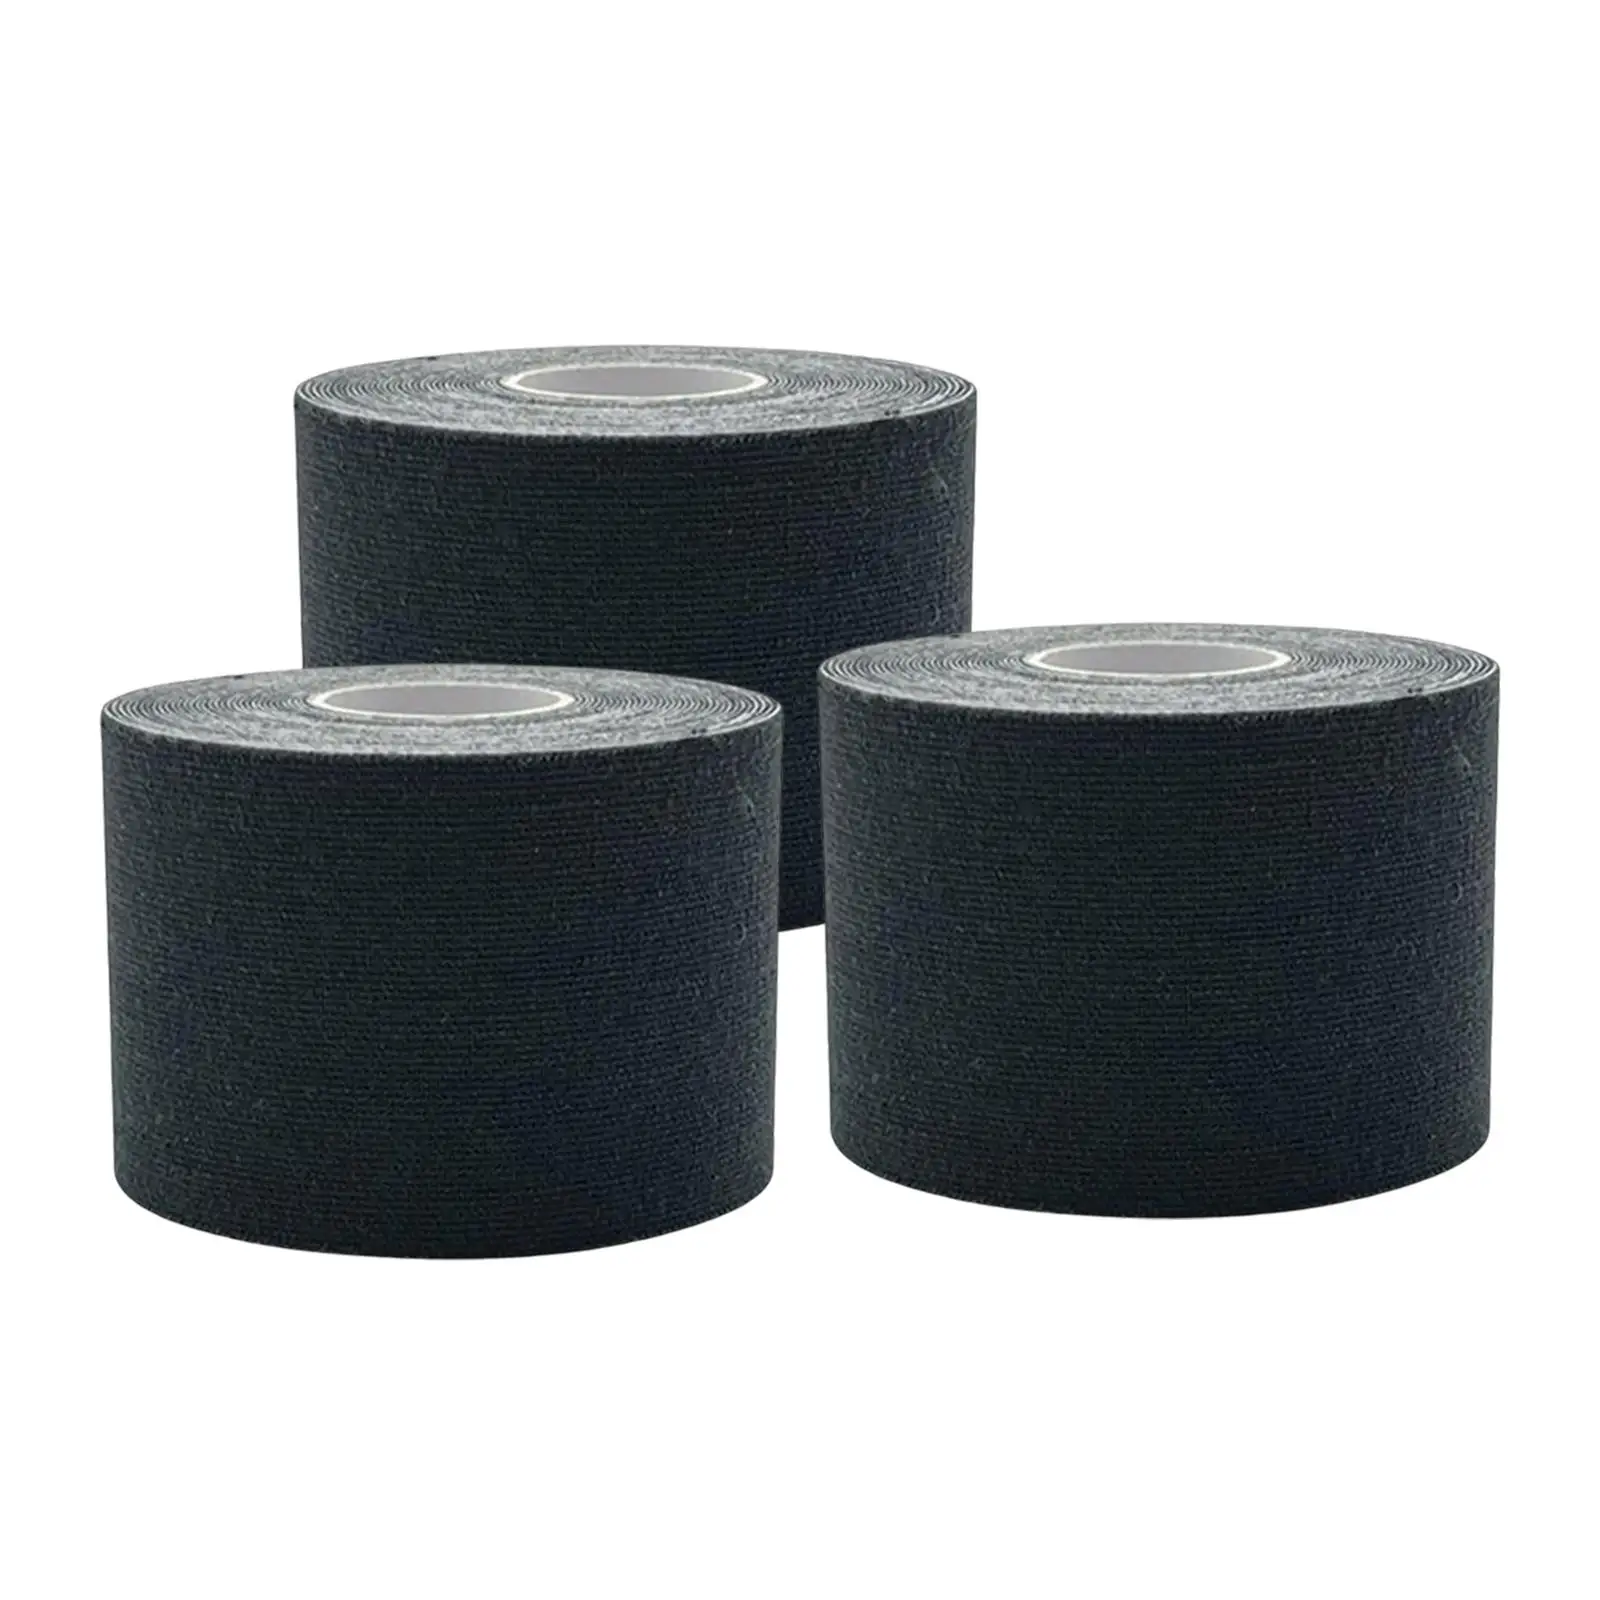 3x 3Cmx5M Tape for Sports Athletic Tape Muscle Tape for Body Knee Running